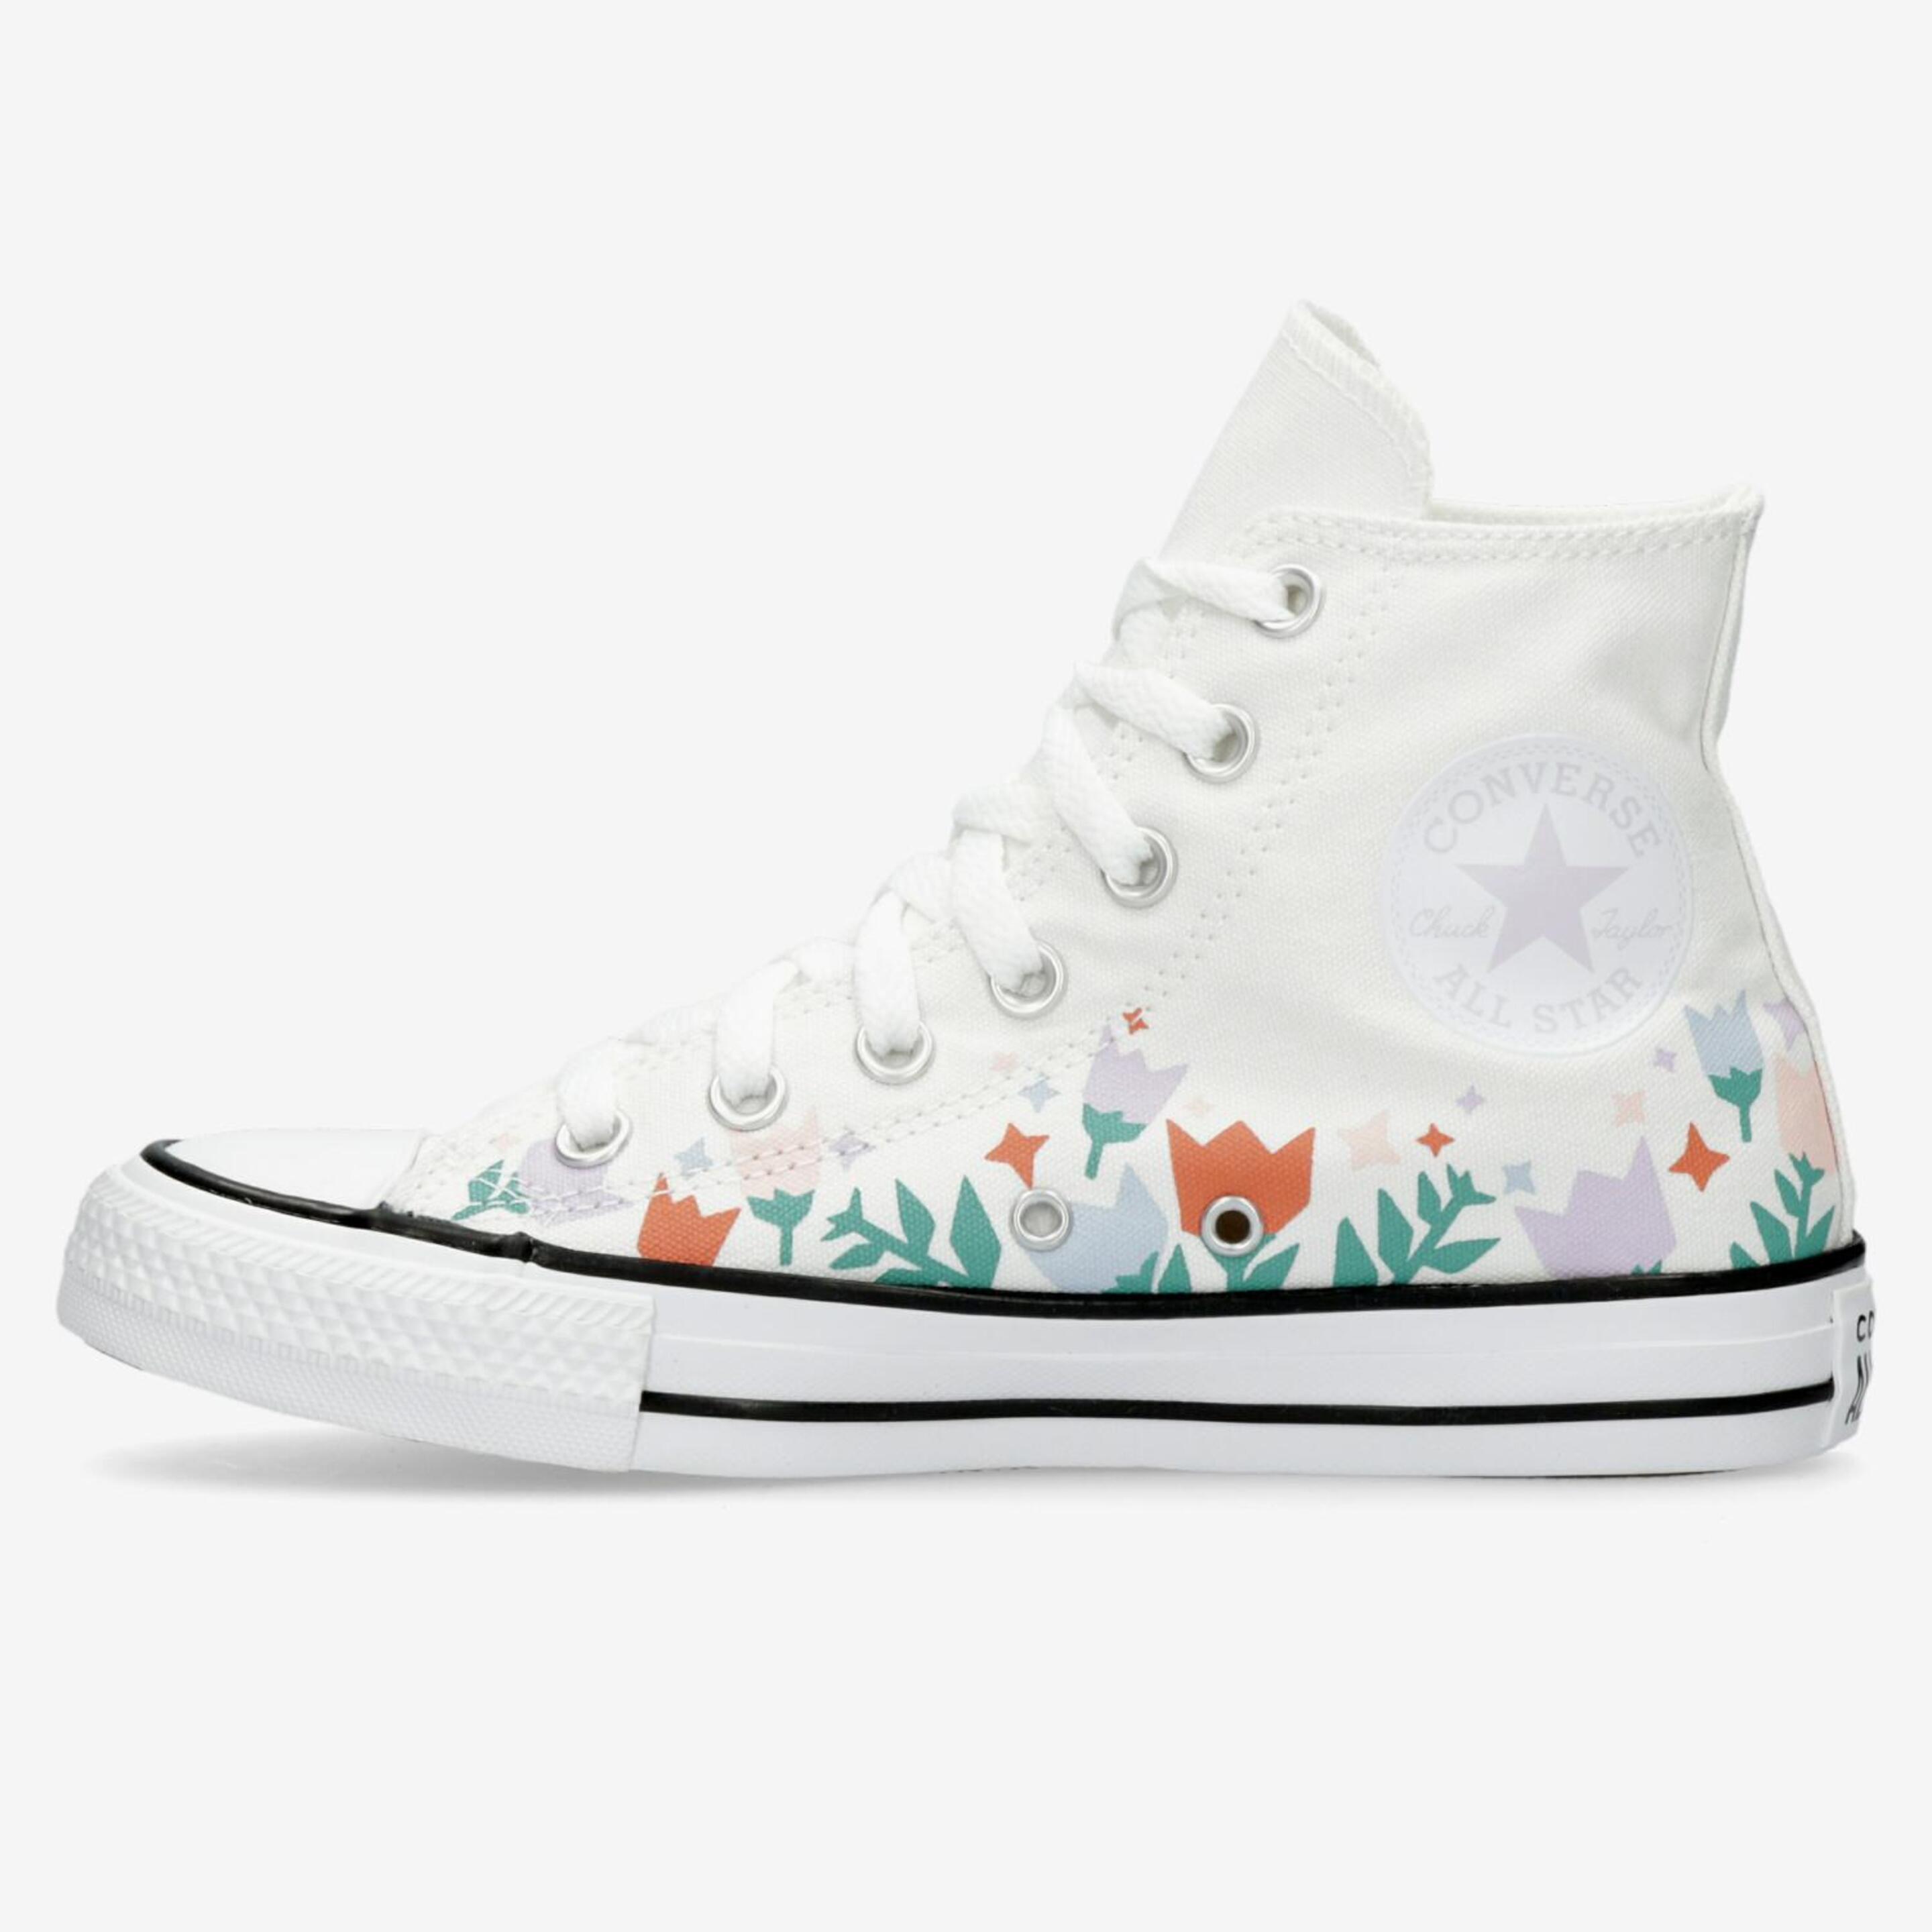 Converse Chuck Taylor All Star Crafted